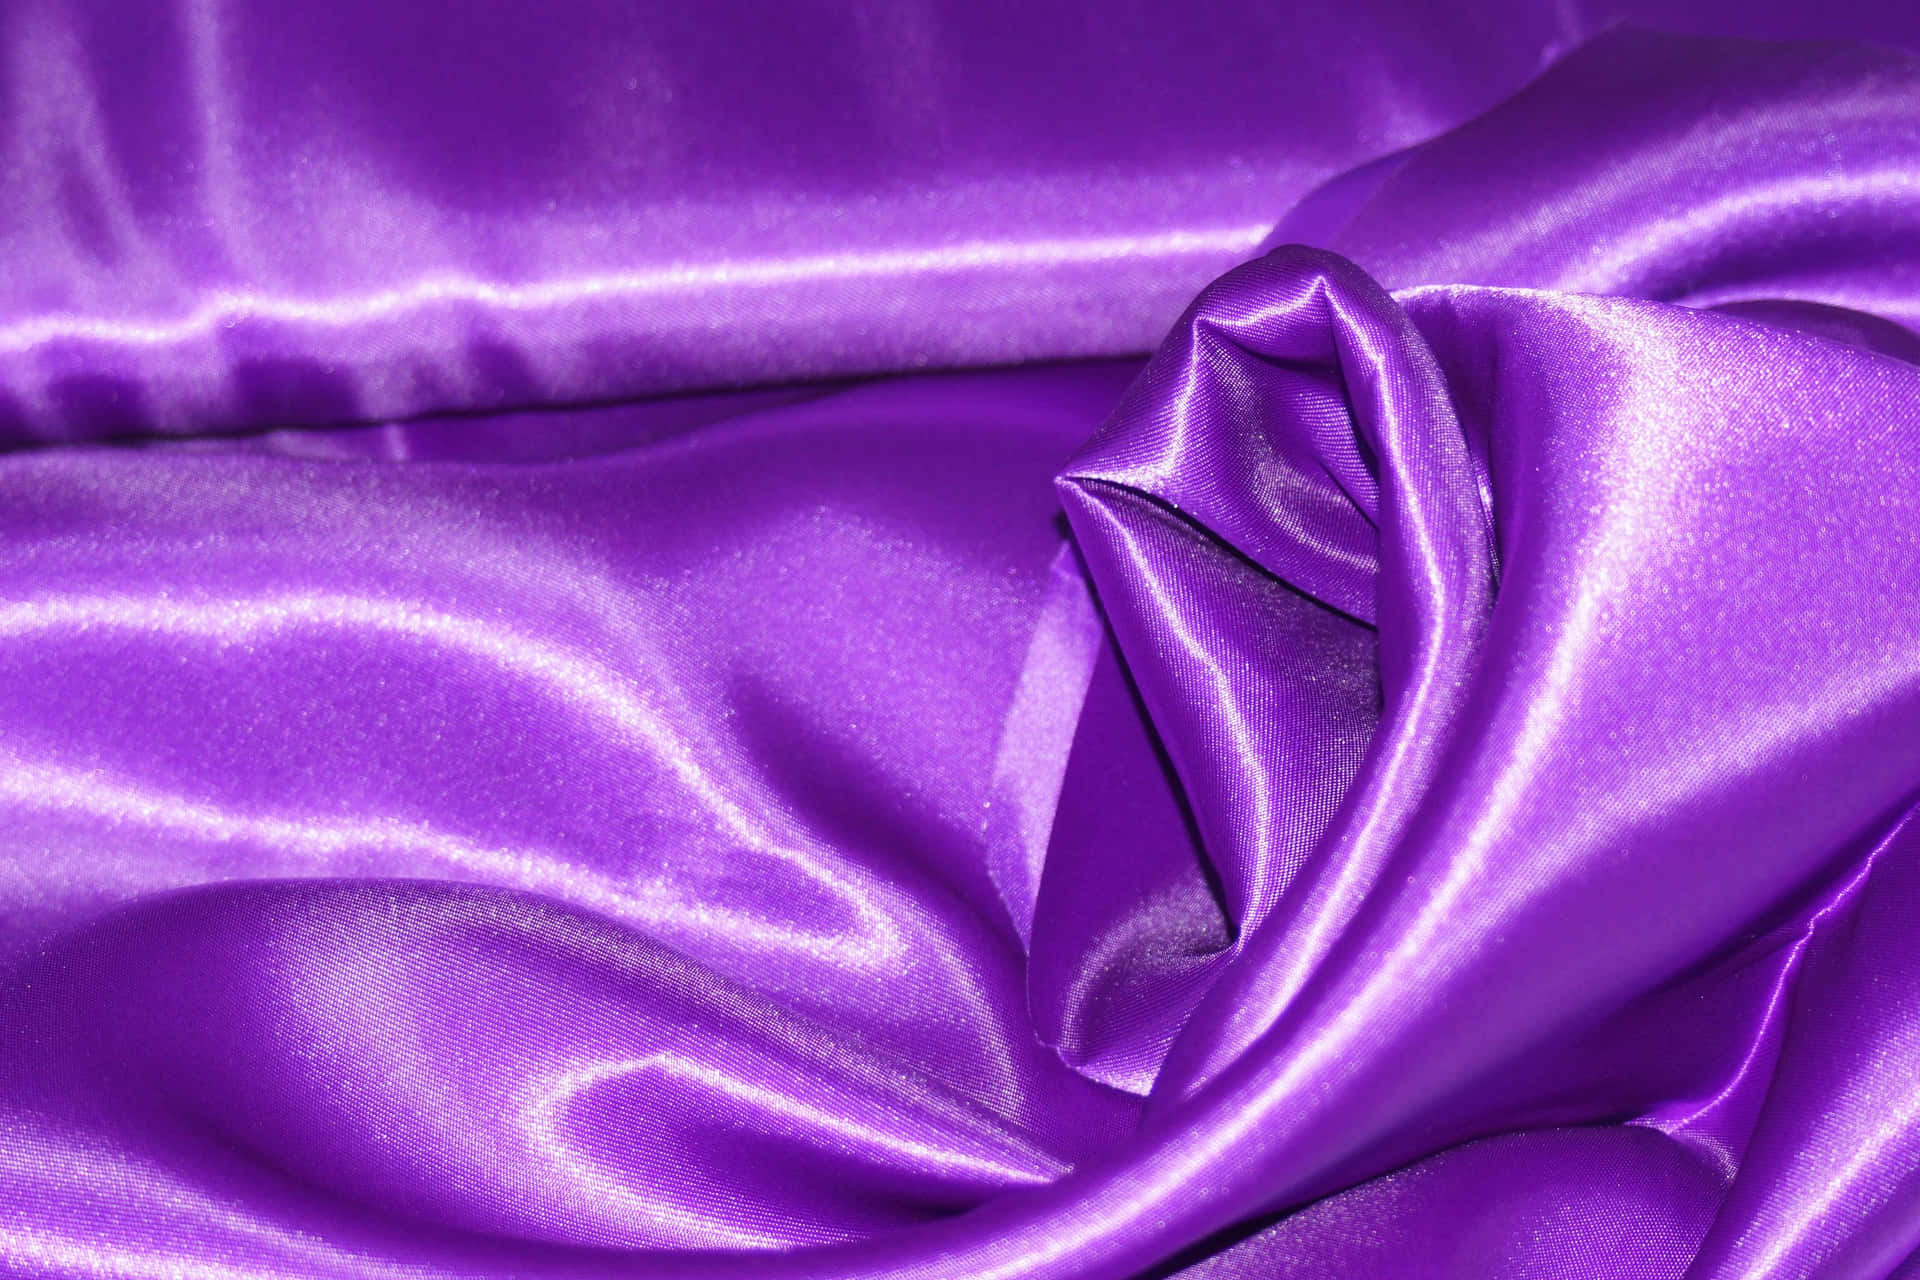 Glamorous and Sophisticated: Transform Your Home with this Stunning Purple Satin Wallpaper Wallpaper